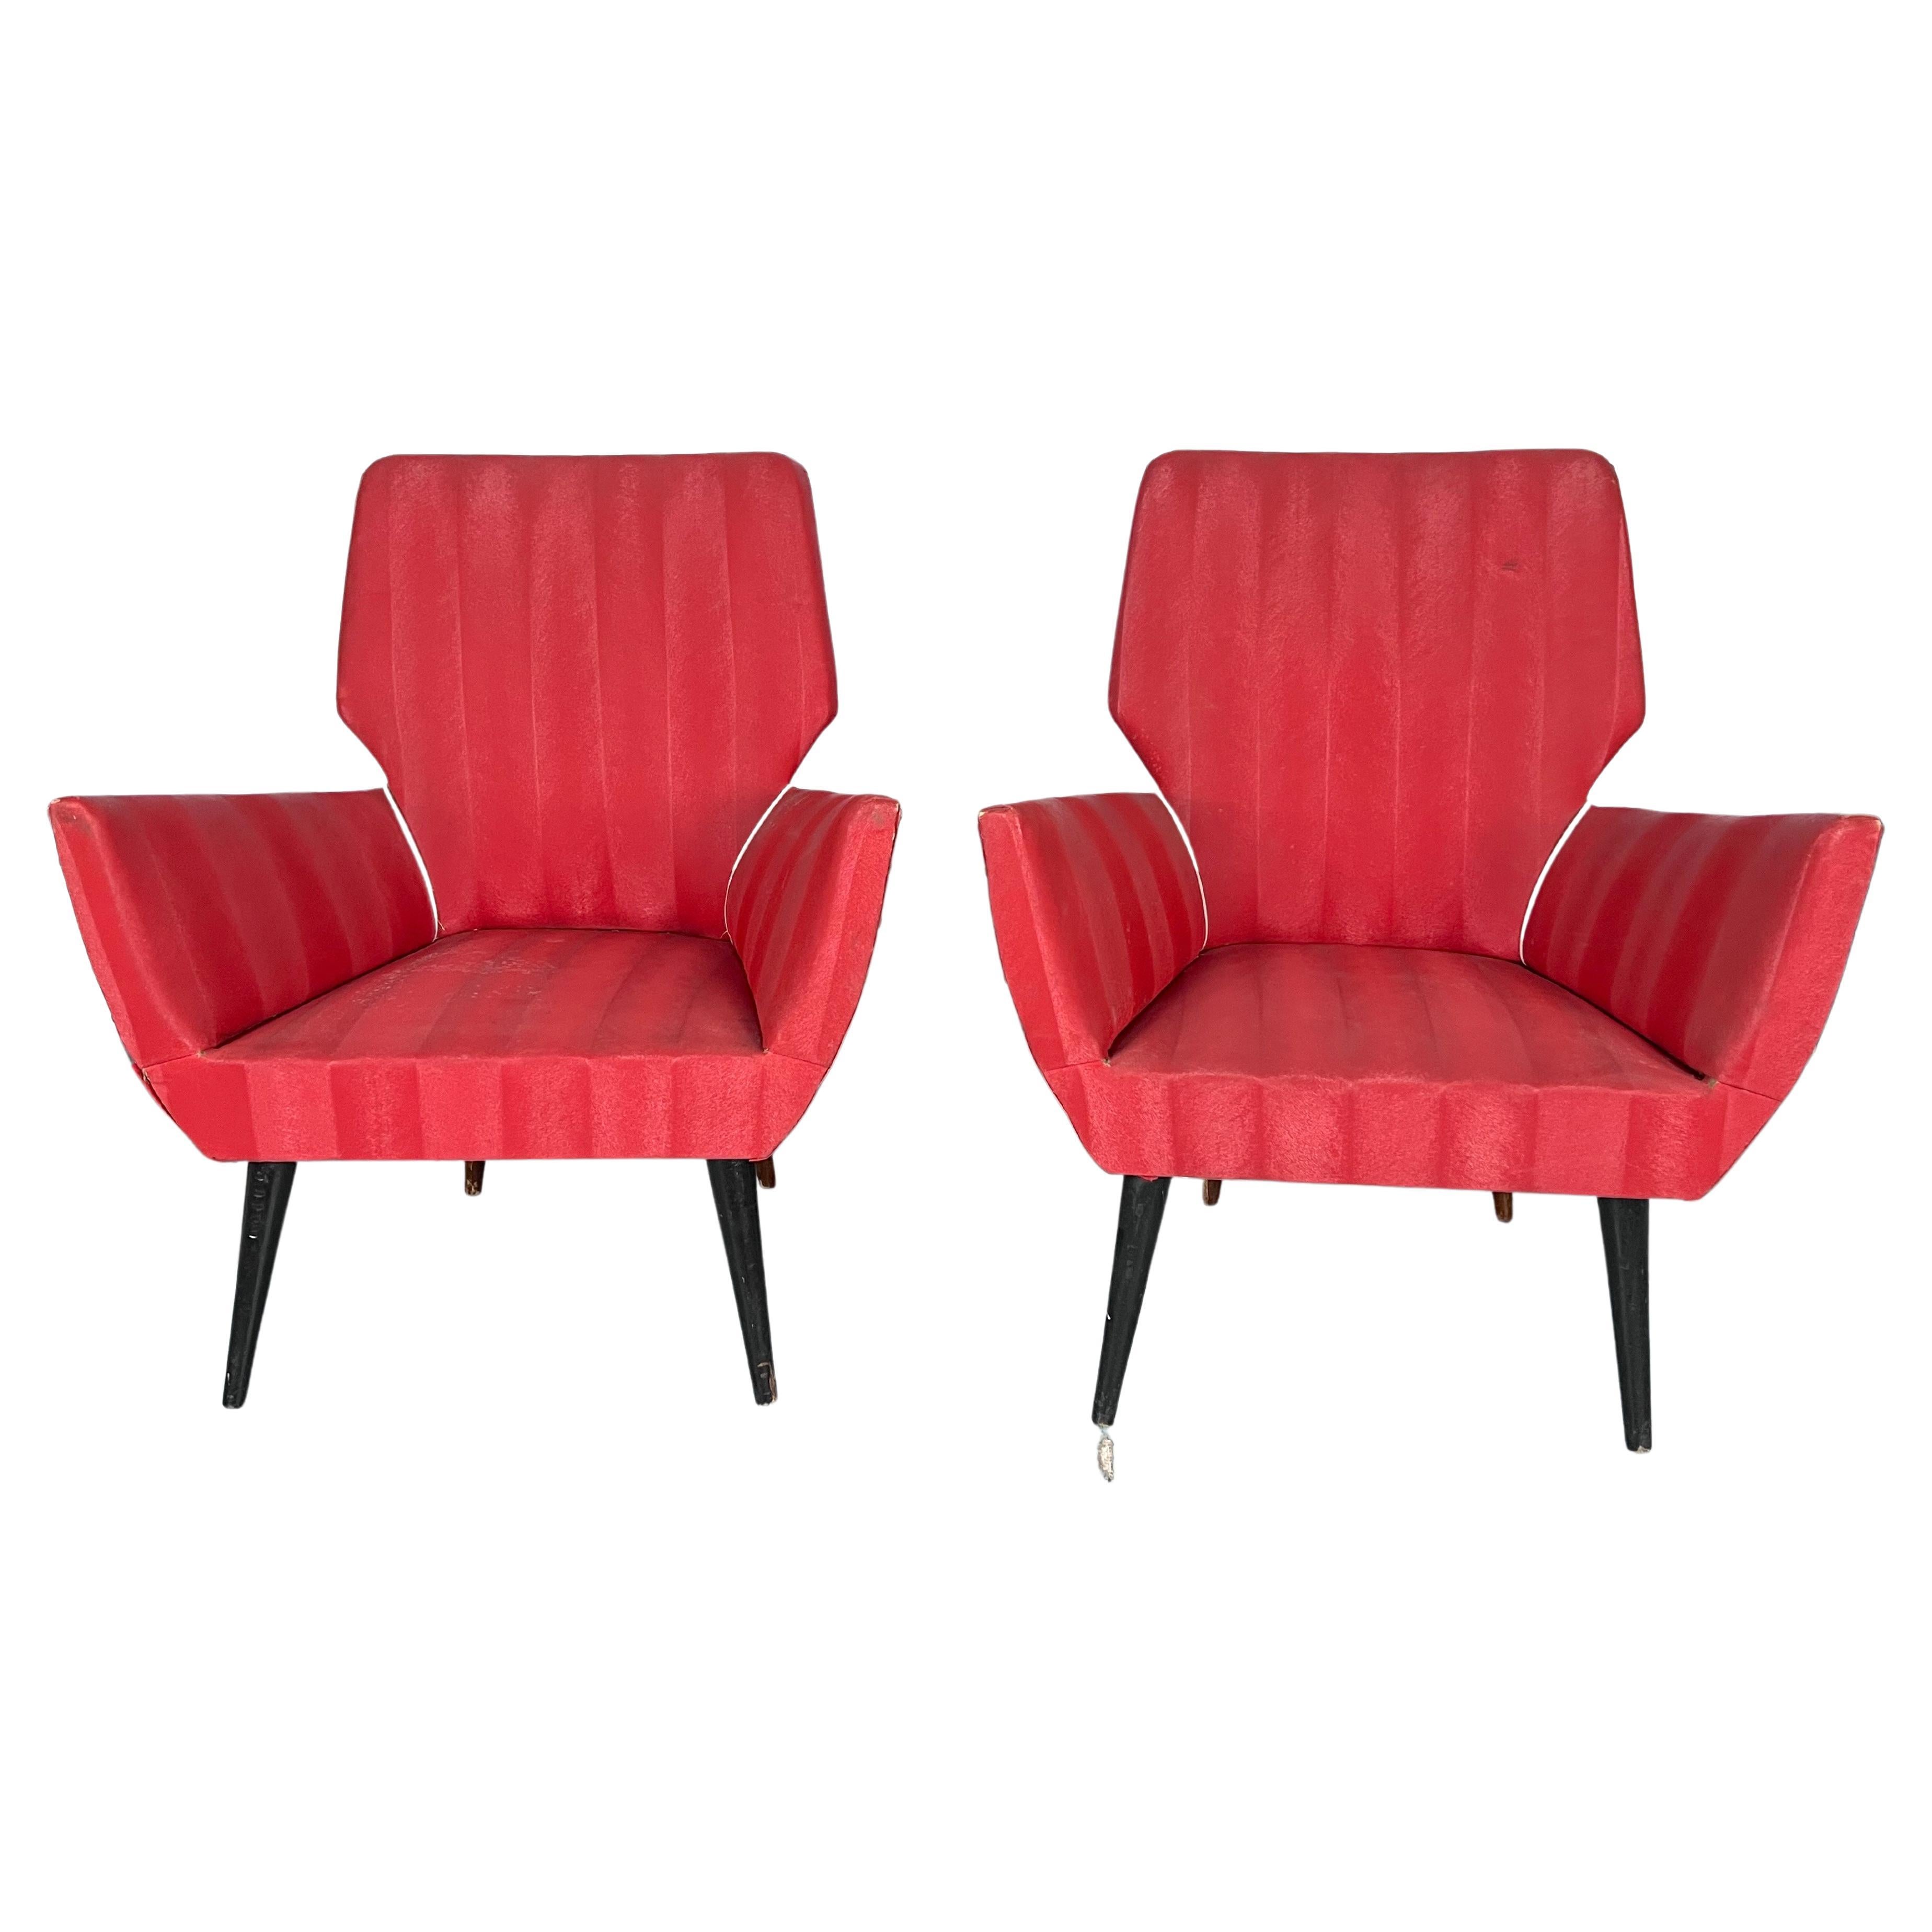 Mid-Century Modern Pair of red armchairs. Italy 1950s